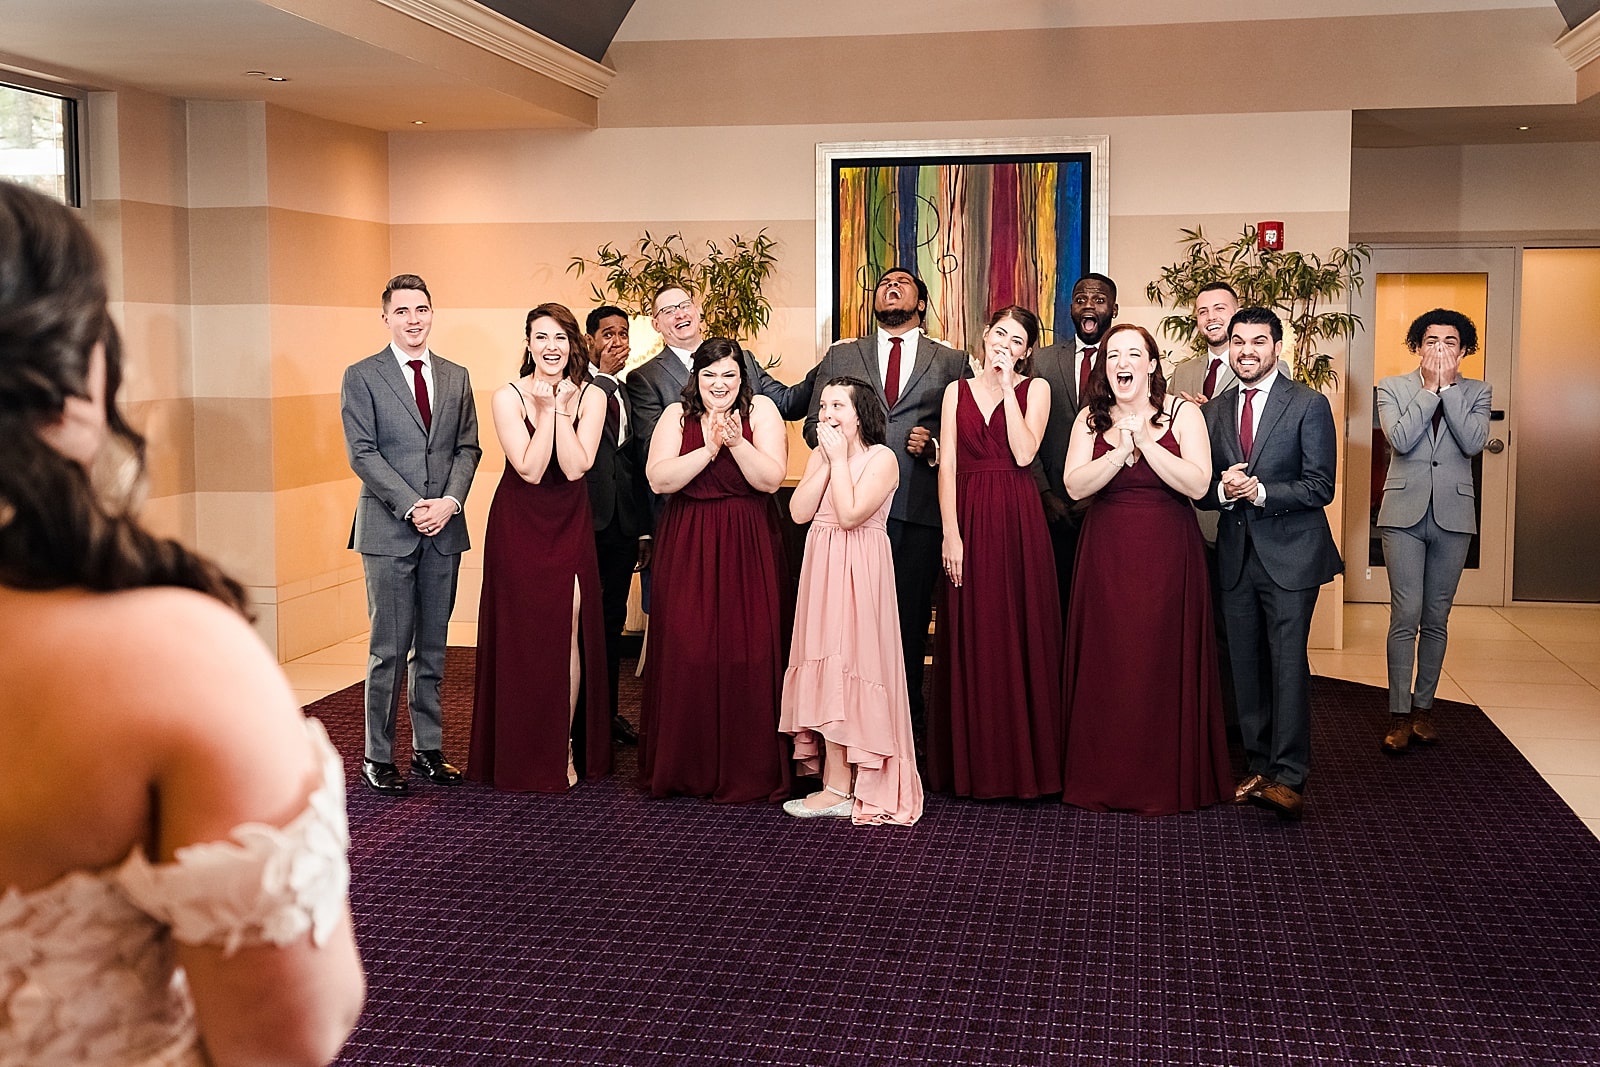 This bride did a first look with the wedding party and their reactions were priceless